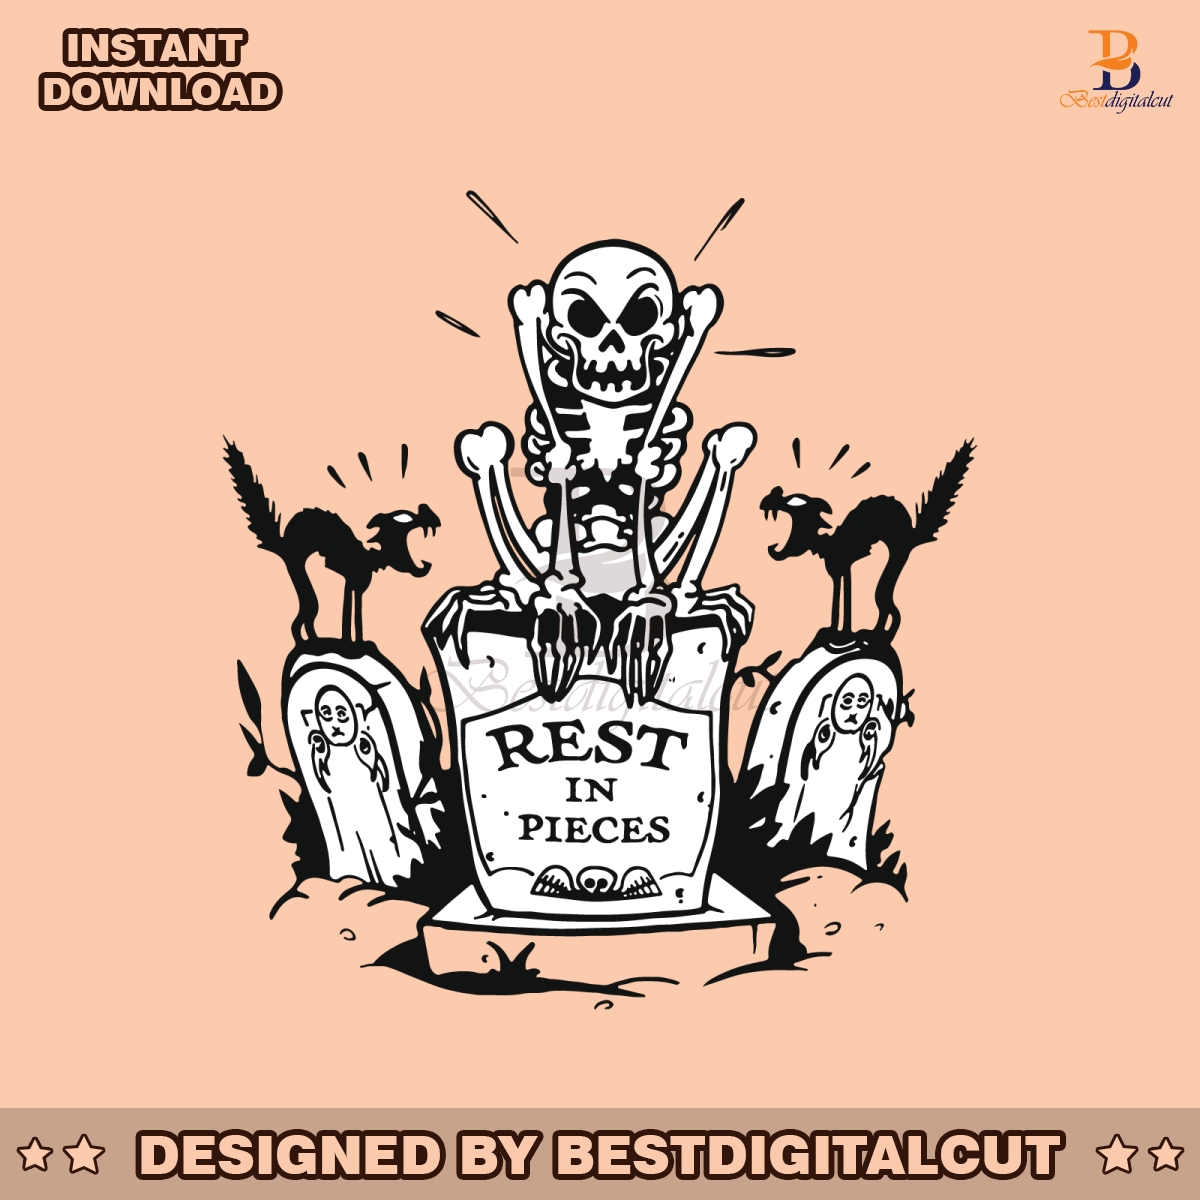 silly-symphony-the-skeleton-rest-in-pieces-svg-download